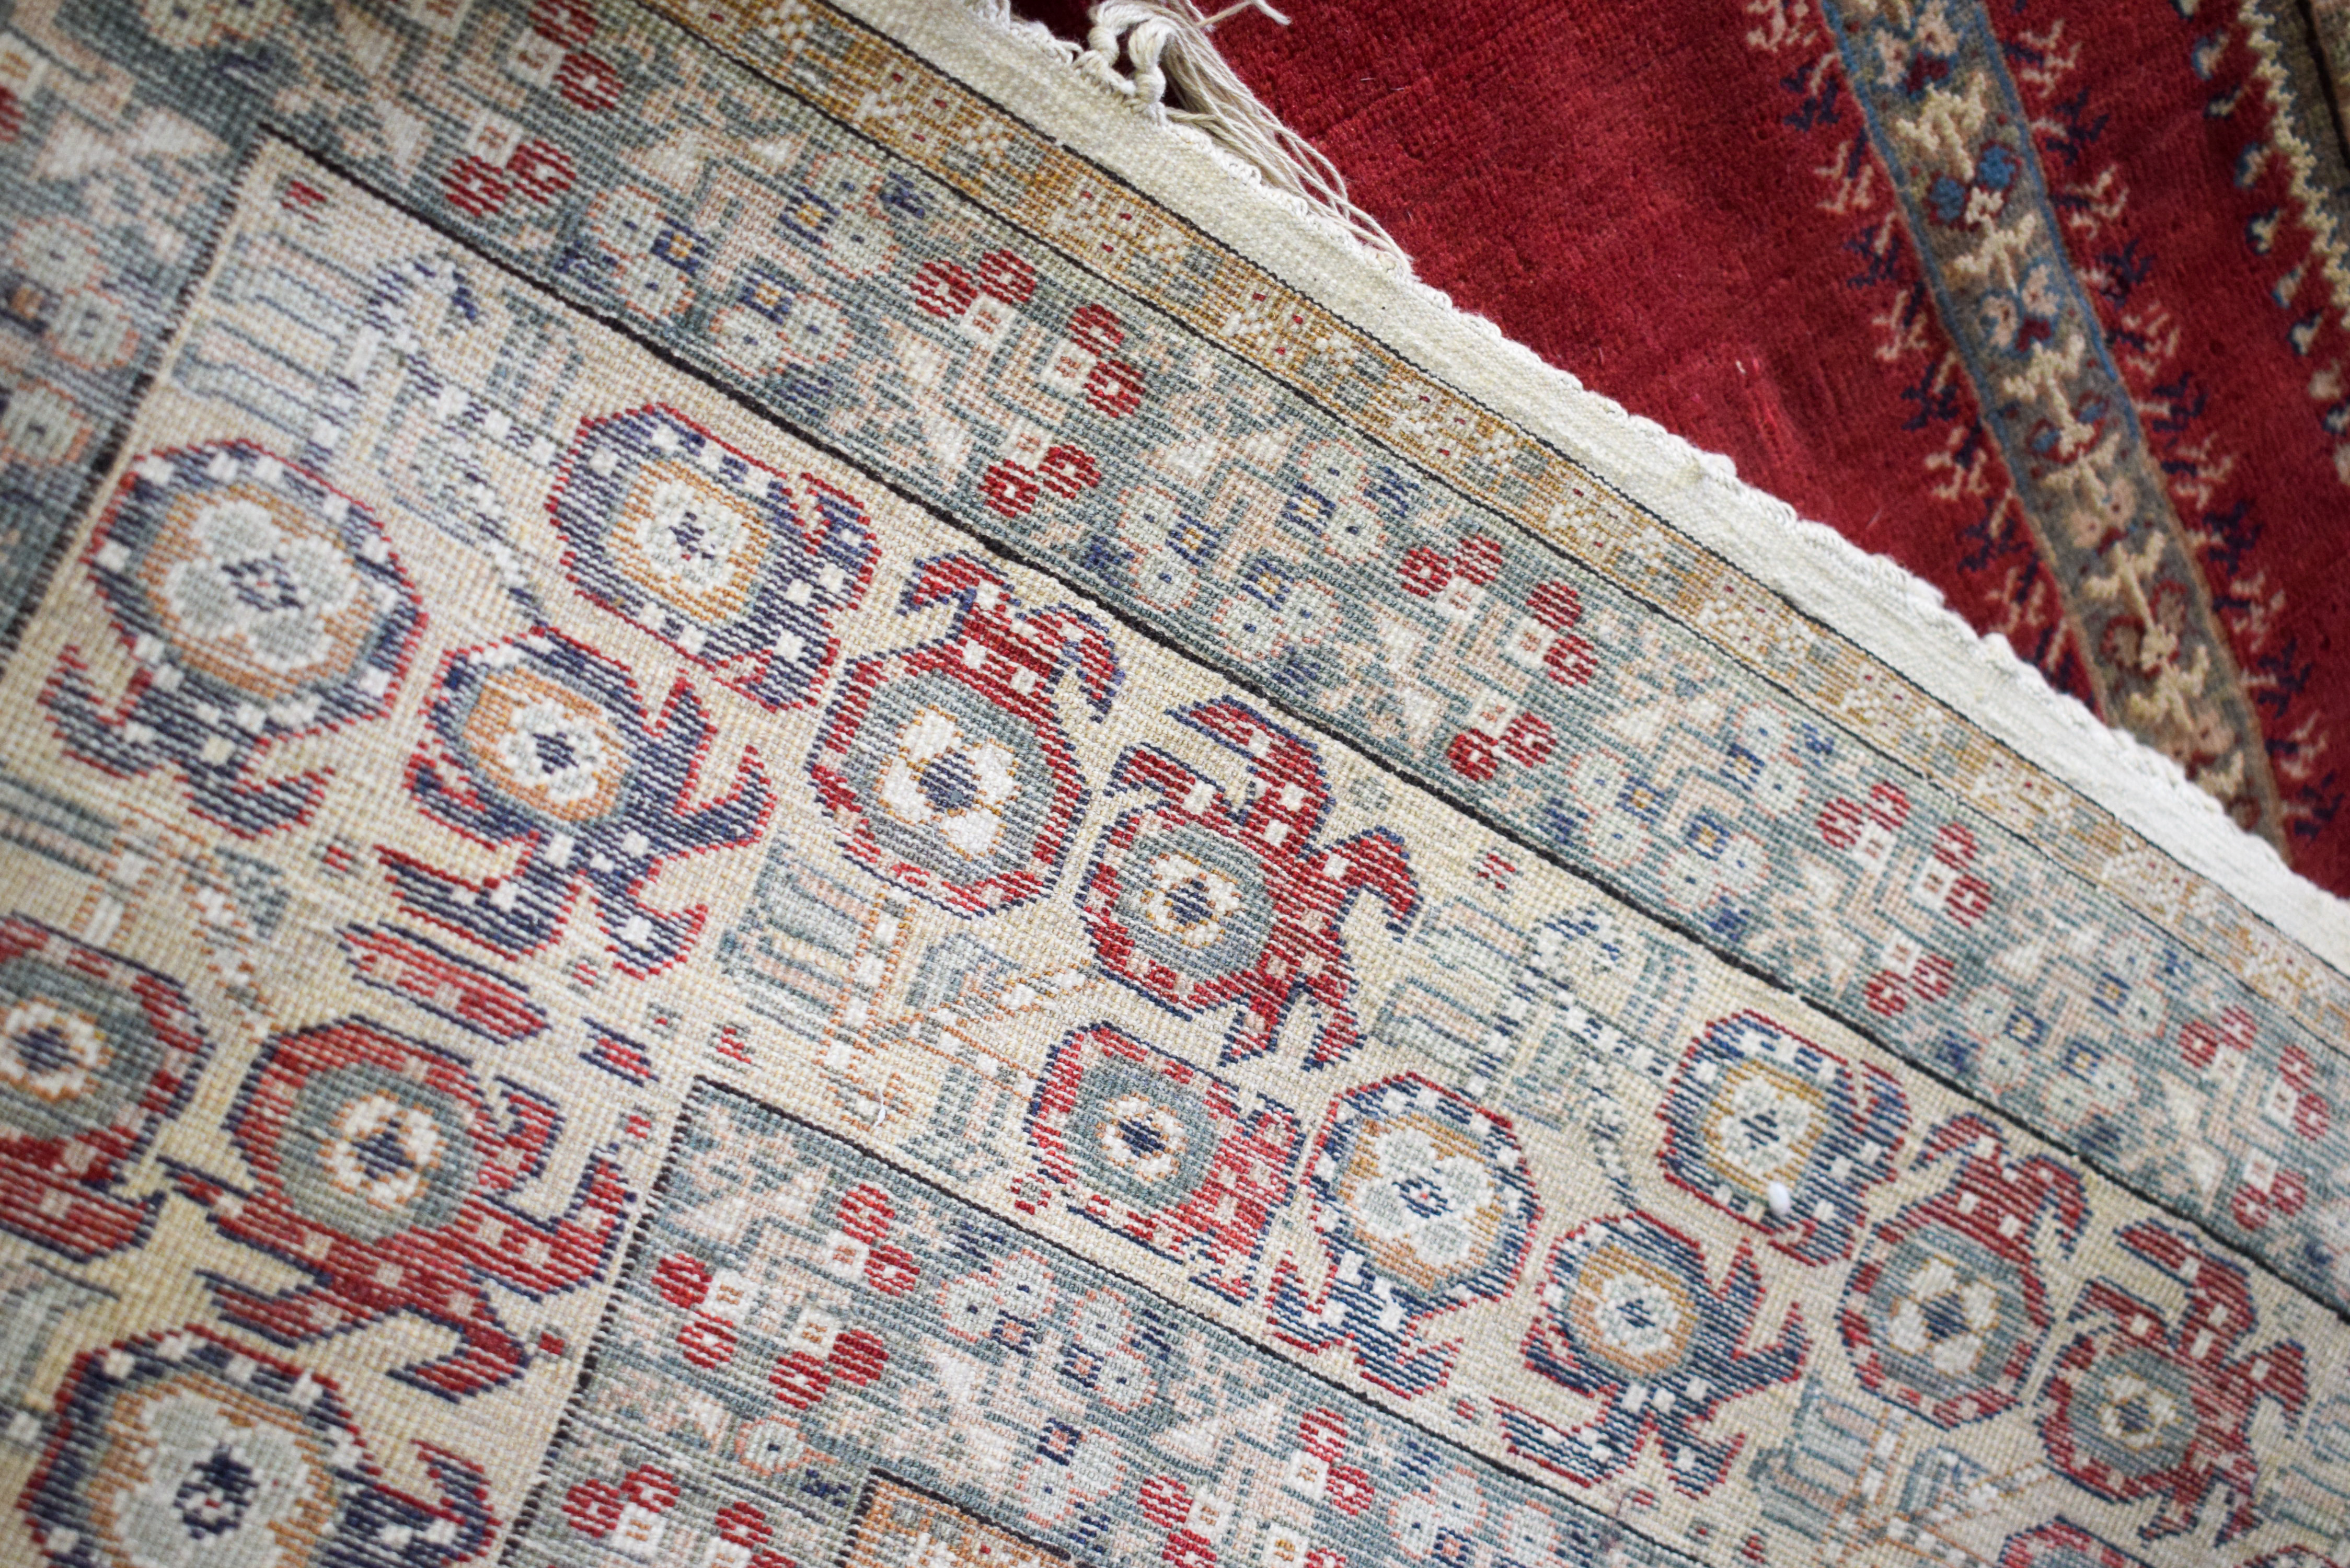 AN EARLY 20TH CENTURY MIDDLE EASTERN SILK PRAYER RUG decorated with motifs. 190 cm x 123 cm. - Image 3 of 3